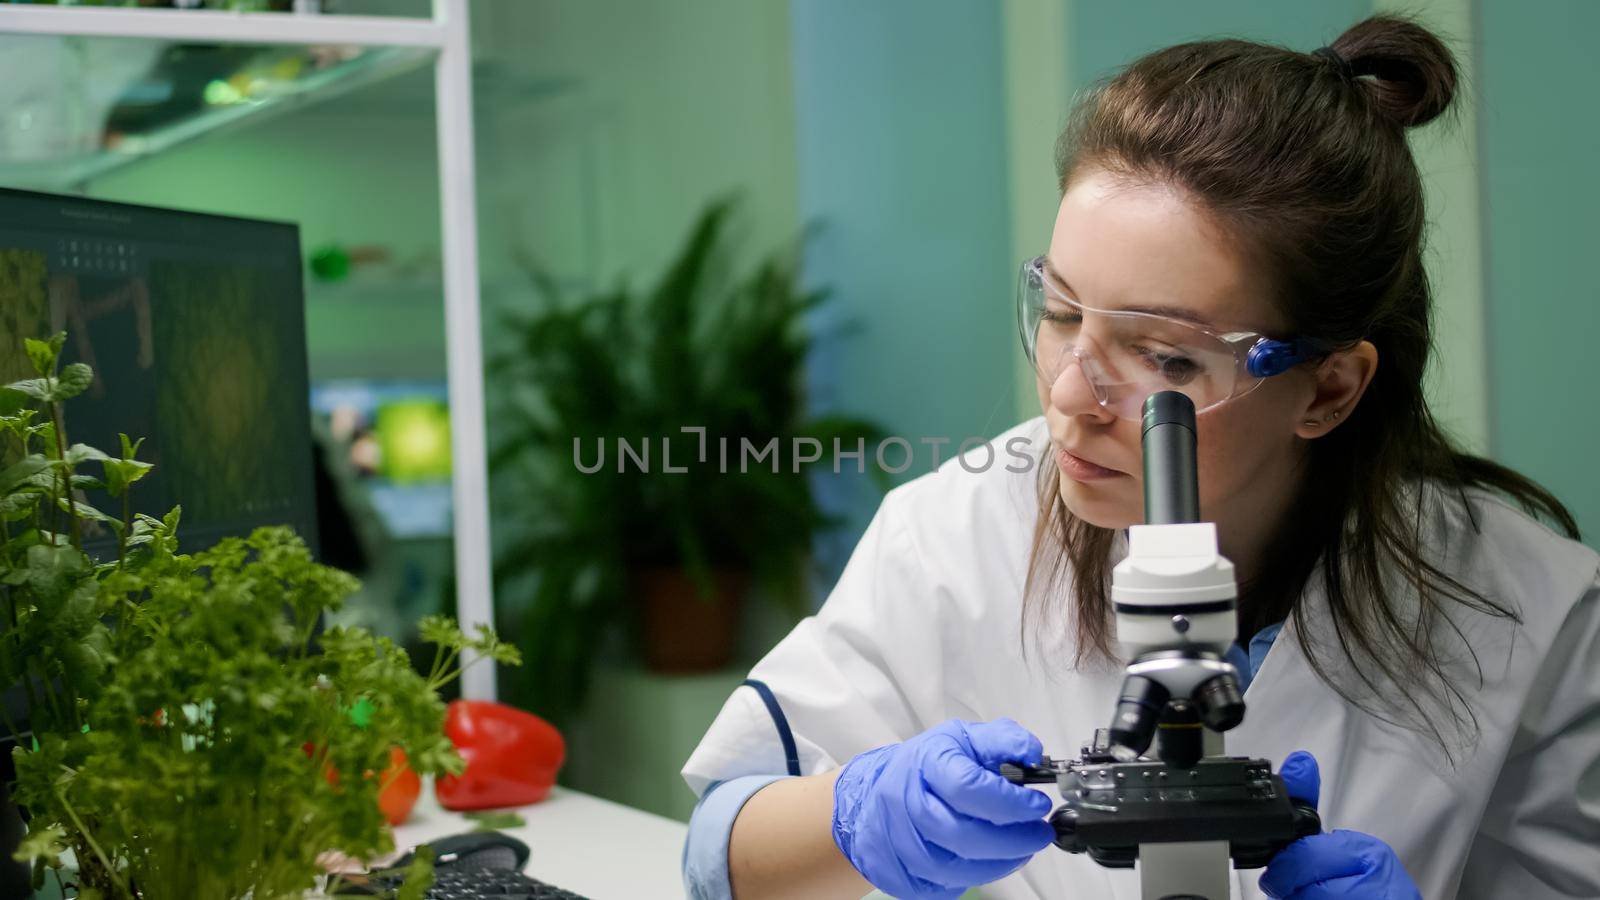 Biologist scientist looking at green leaf sample under microscope by DCStudio